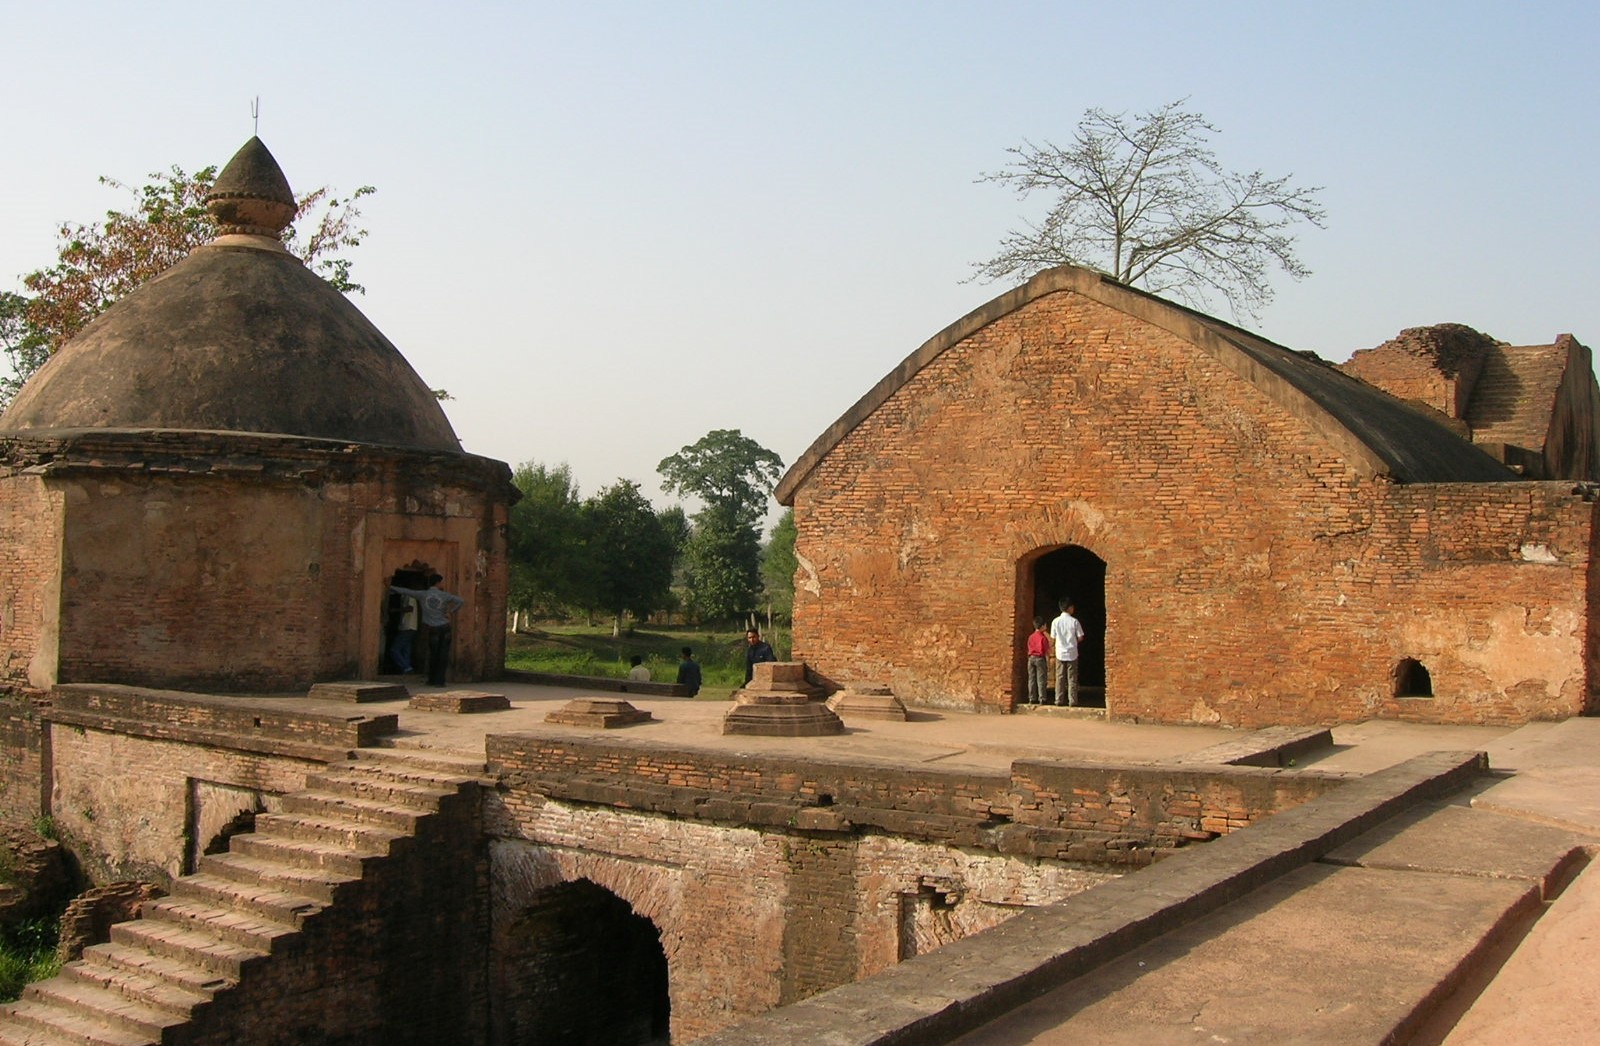 A view of the Talatal Ghar. Image Source: Wikimedia Commons